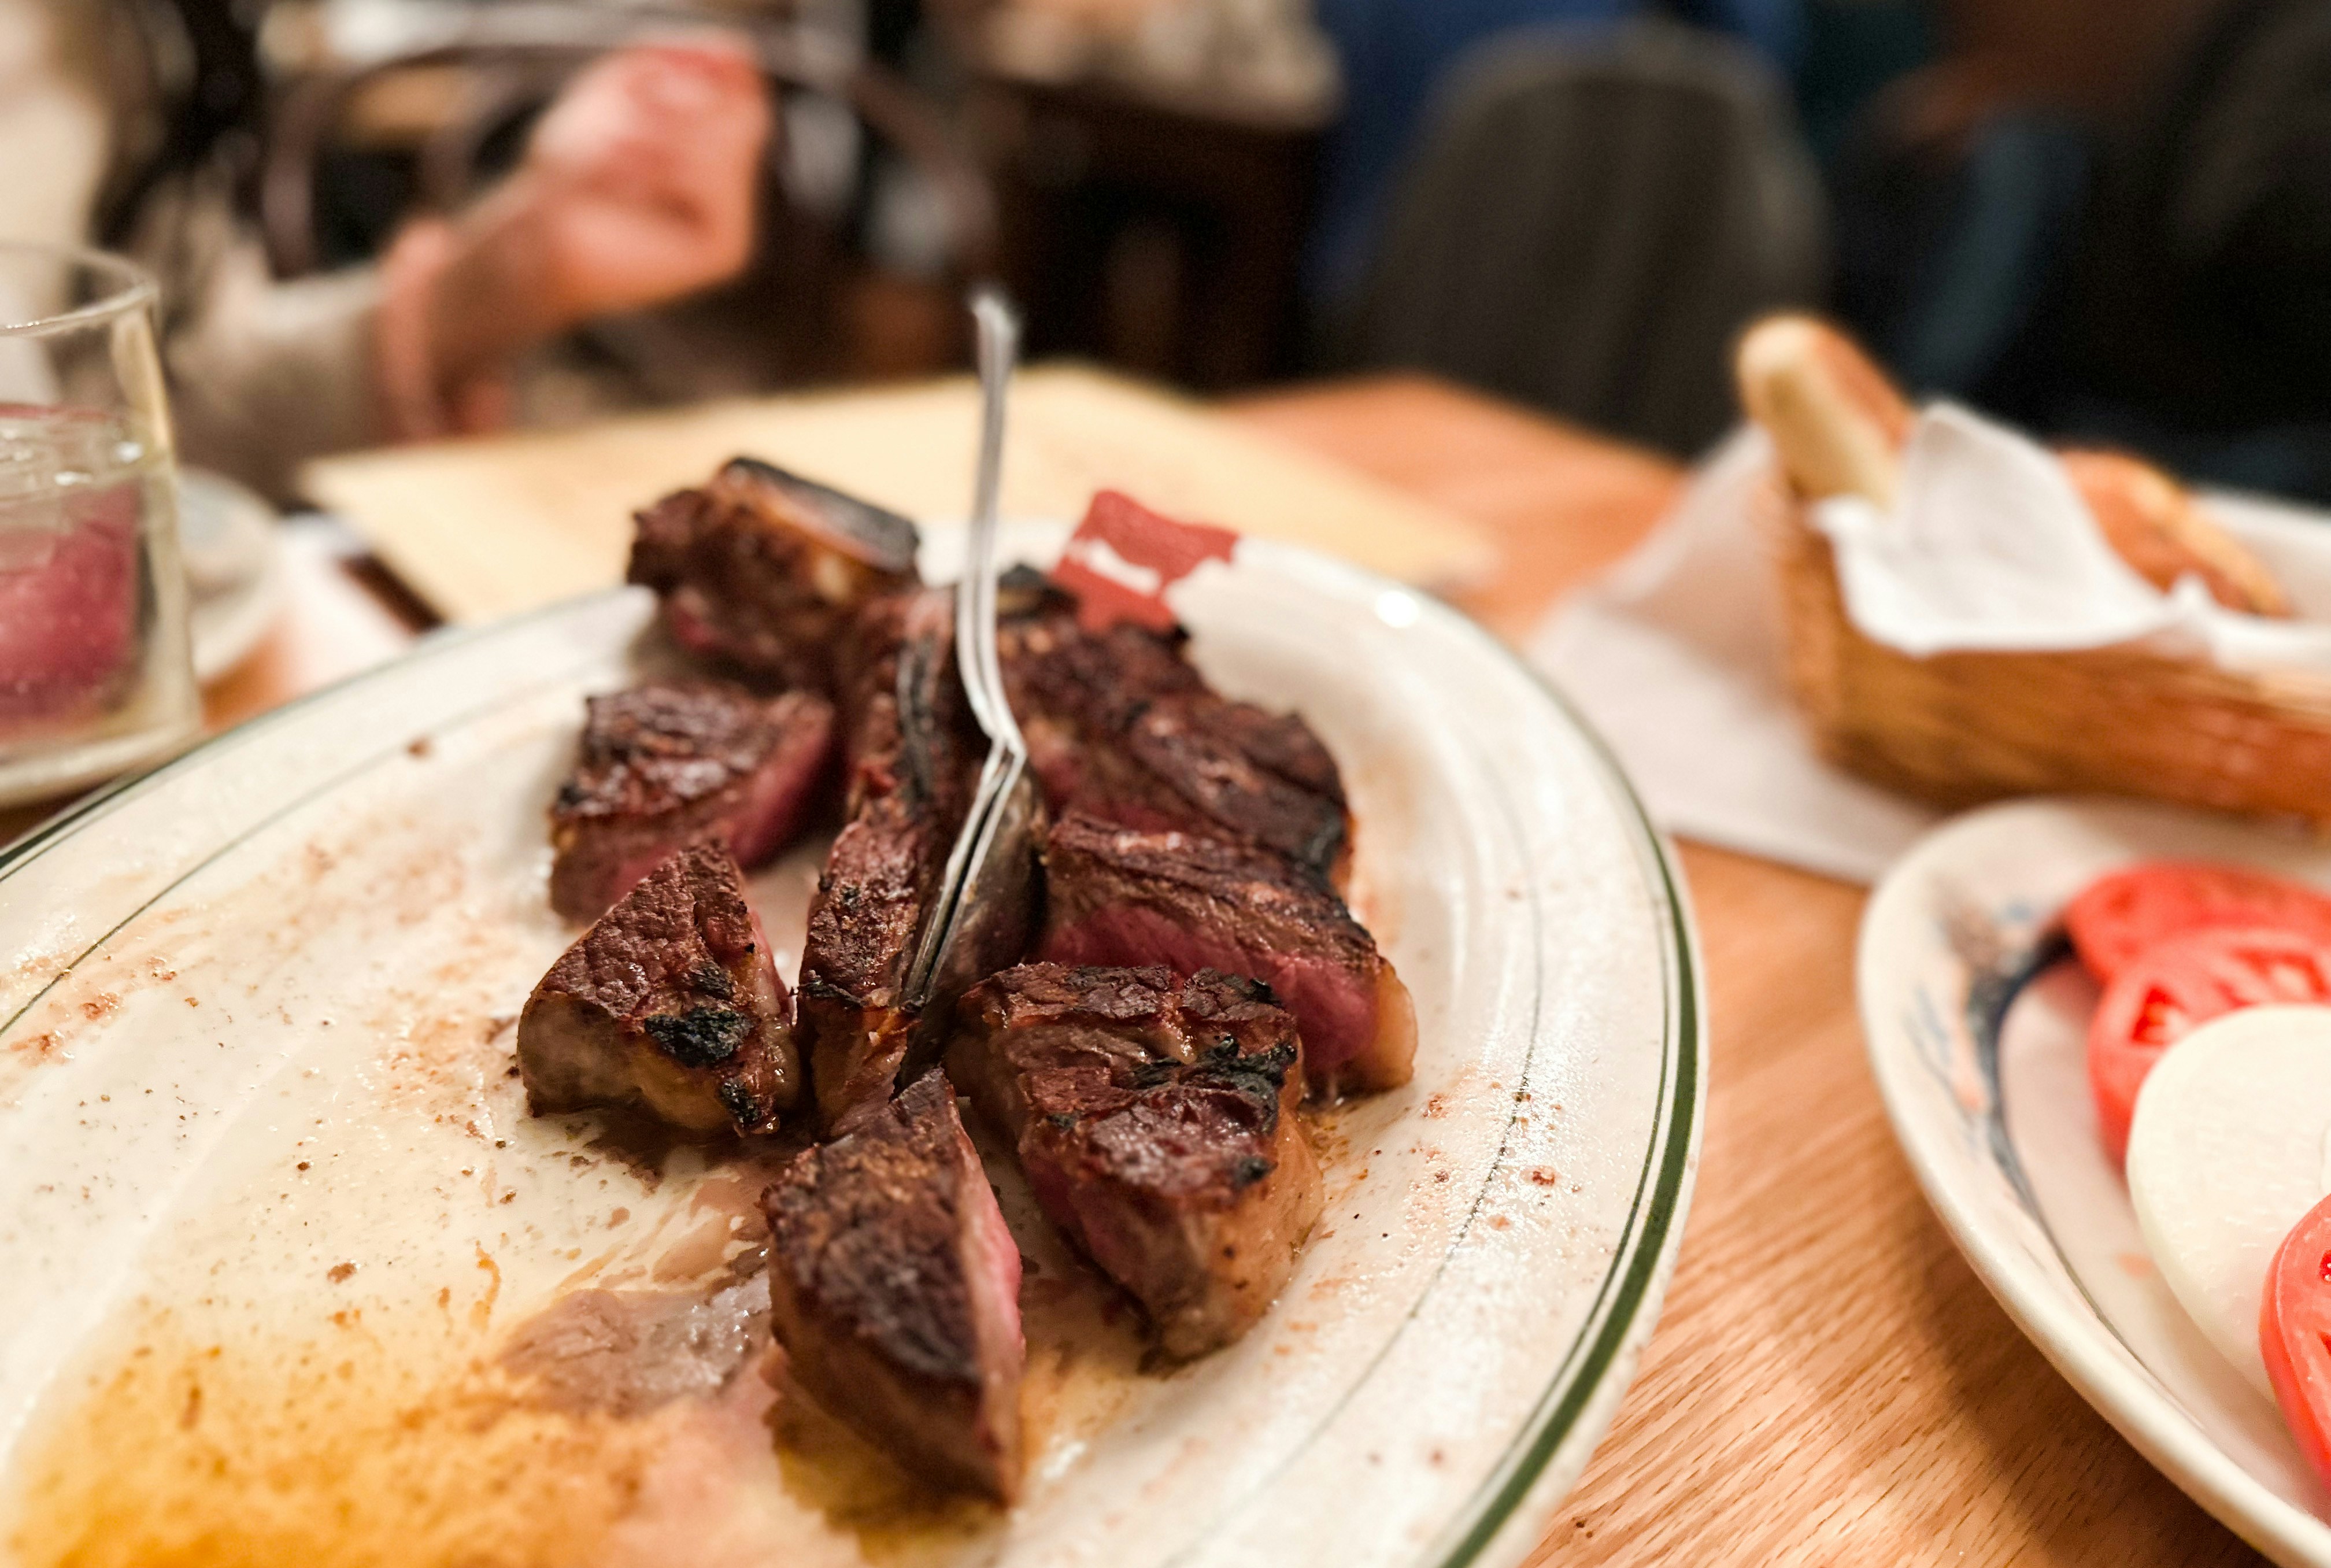 Peter Luger on Iphone 14 Pro